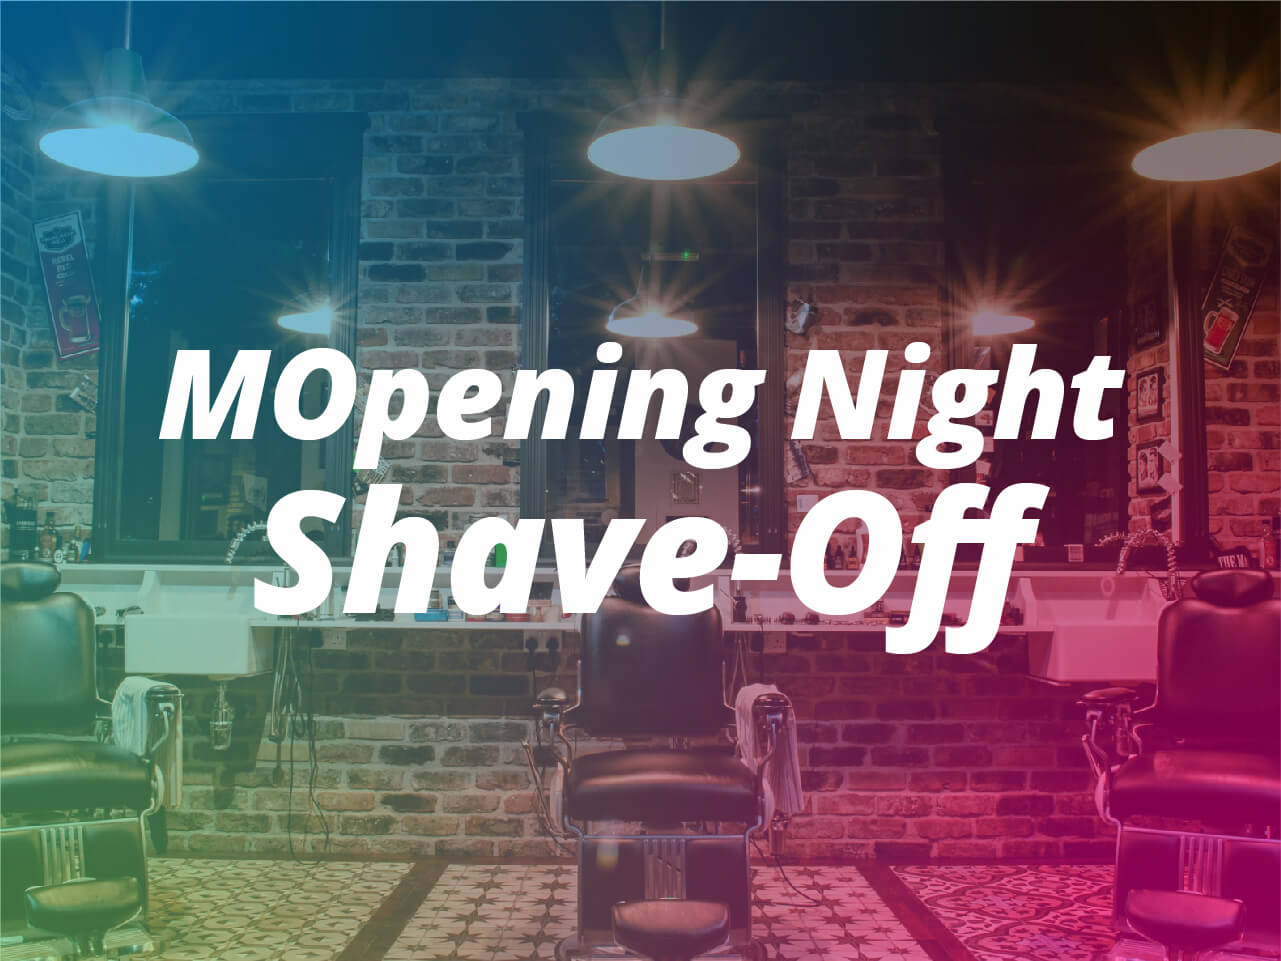 mopening-night-shave-off